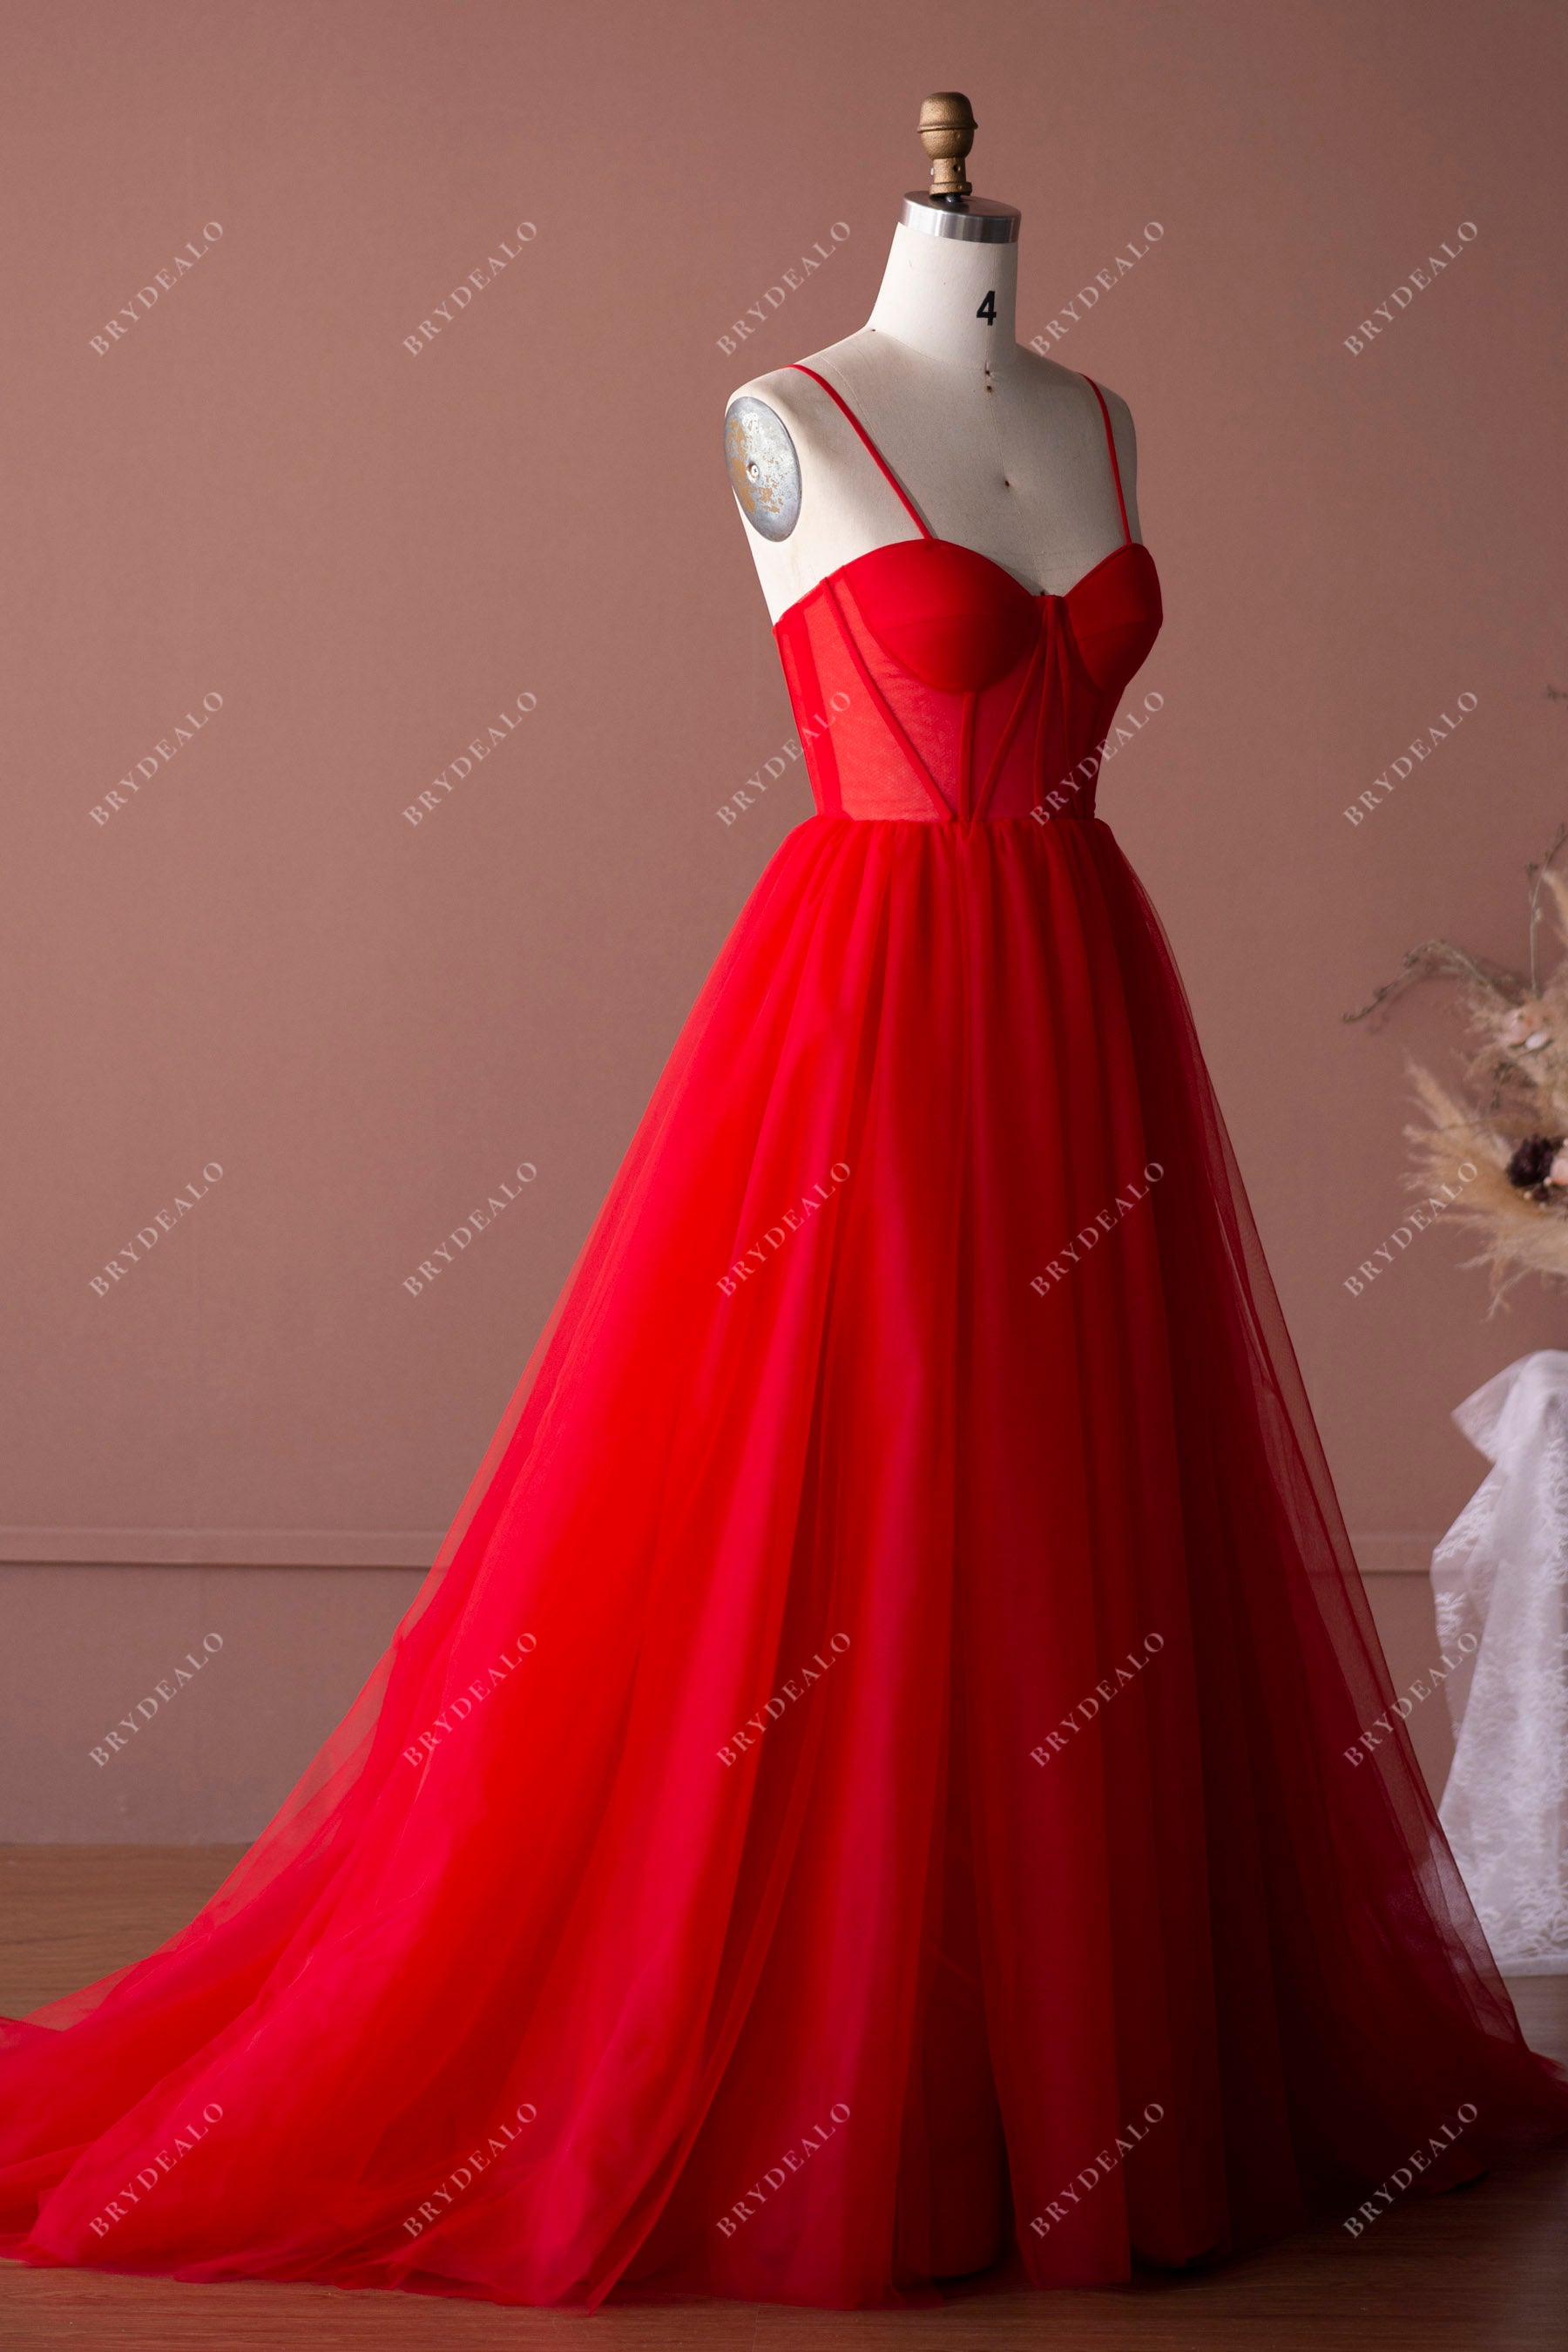 sweetheart neck long train prom gown